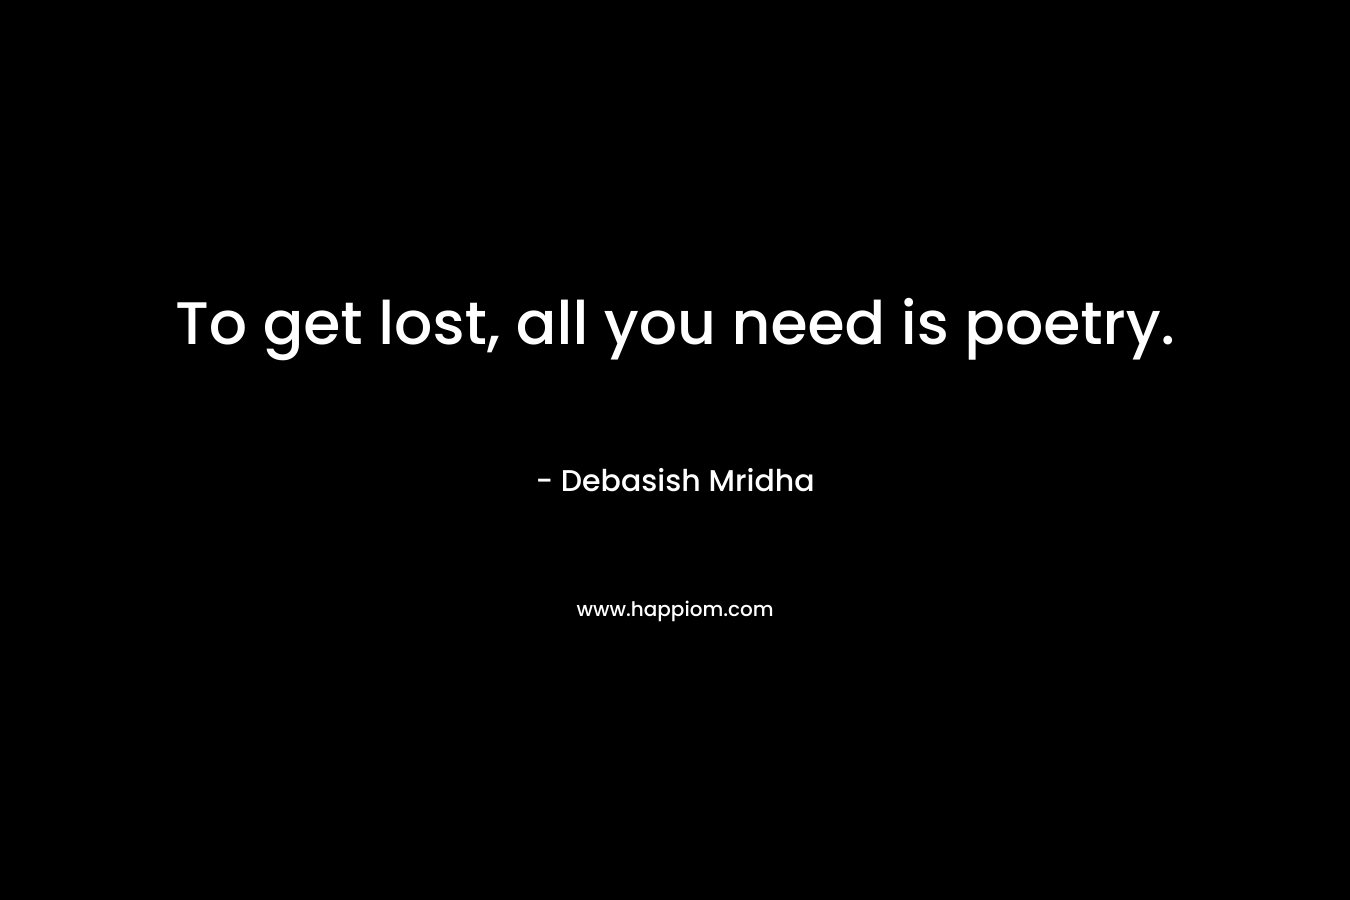 To get lost, all you need is poetry.